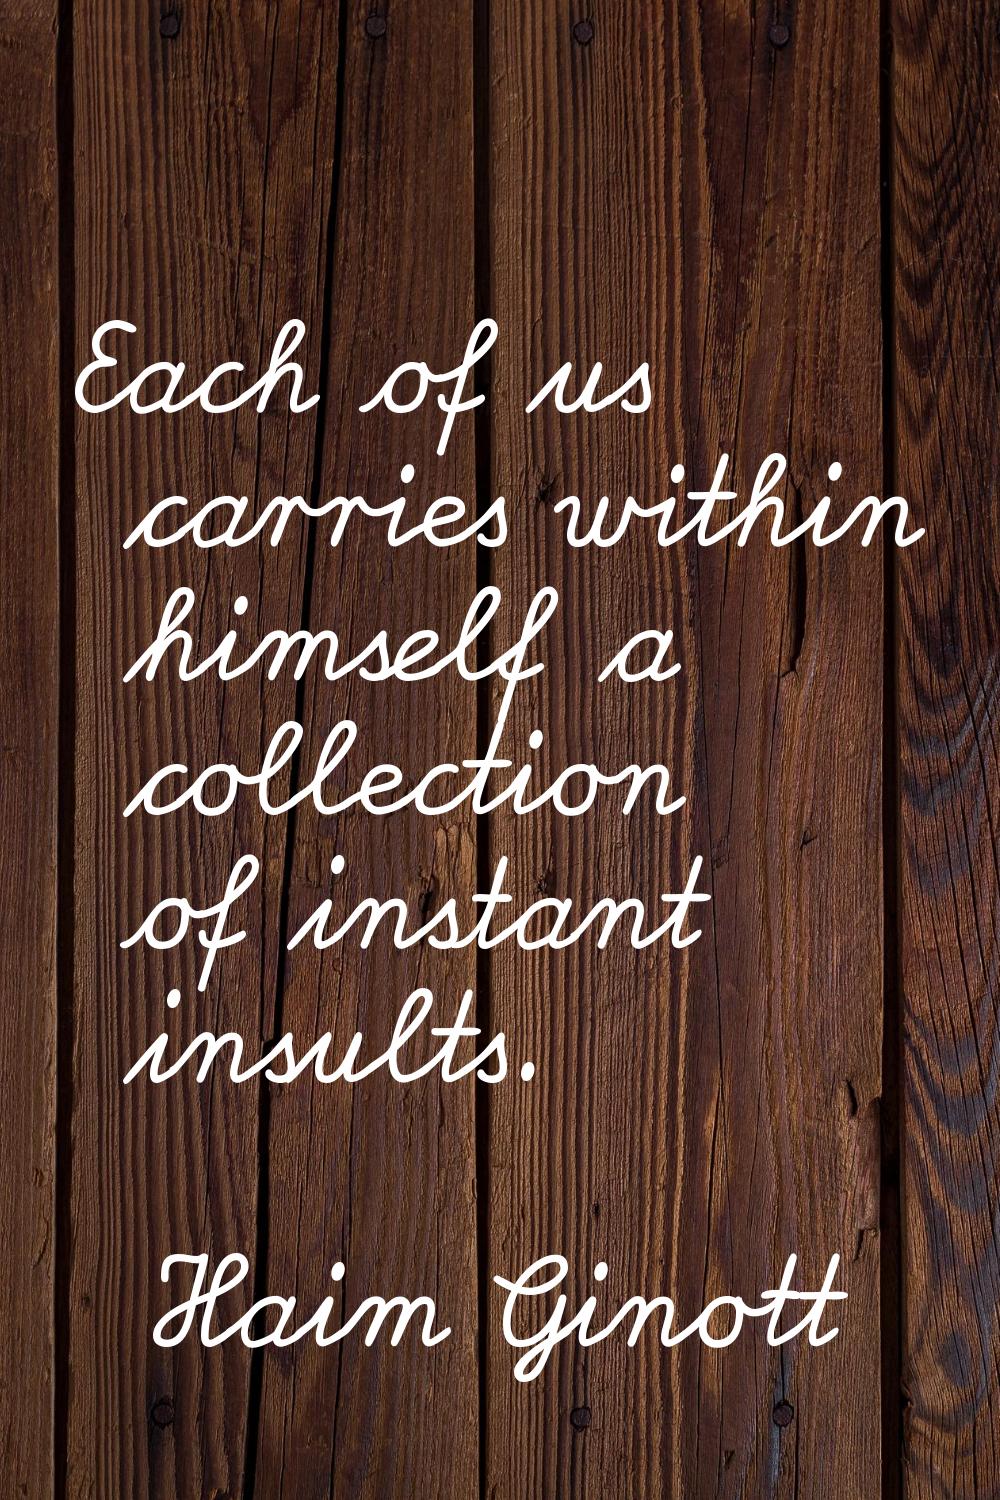 Each of us carries within himself a collection of instant insults.